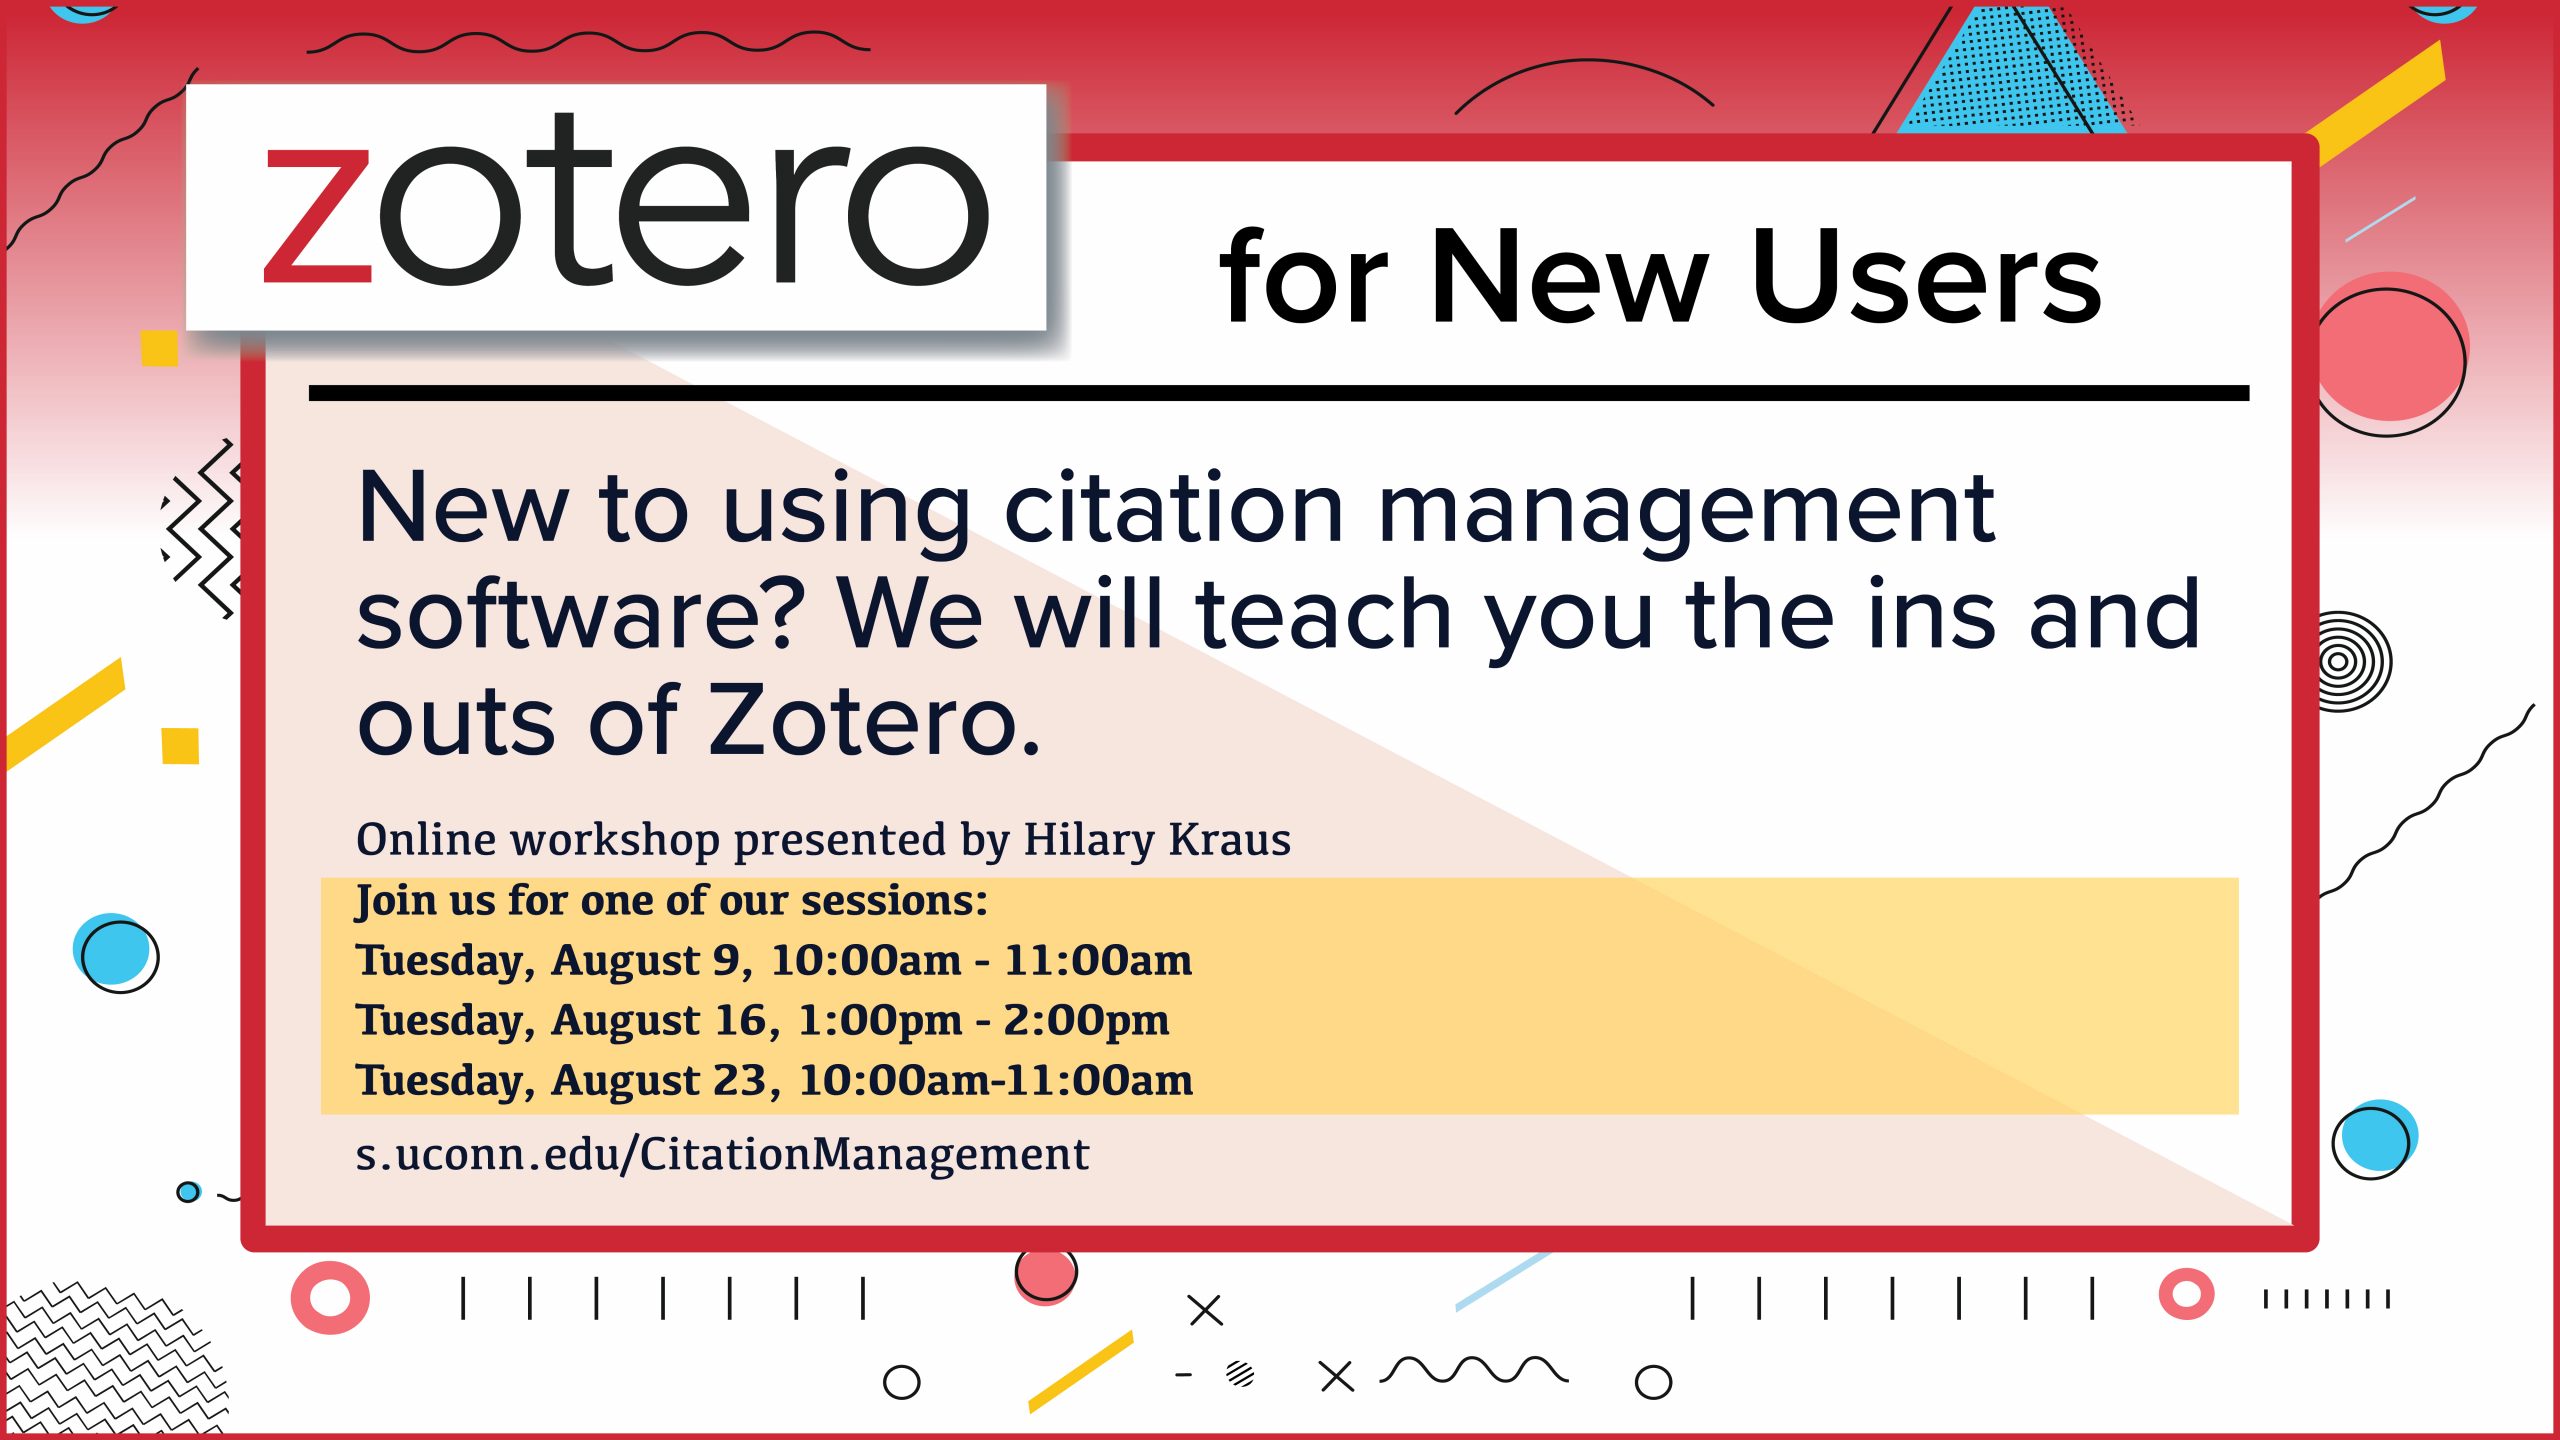 Colorful marketing screen with random geometric shapes, with the text: Zotero for New Users New to using citation management software? We will teach you the ins and outs of Zotero. Online workshop presented by Hilary Kraus Join us for one of our sessions: Tuesday, August 9, 10:00am - 11:00am Tuesday, August 16, 1:00pm - 2:00pm Tuesday, August 23, 10:00am-11:00am s.uconn.edu/CitationManagement